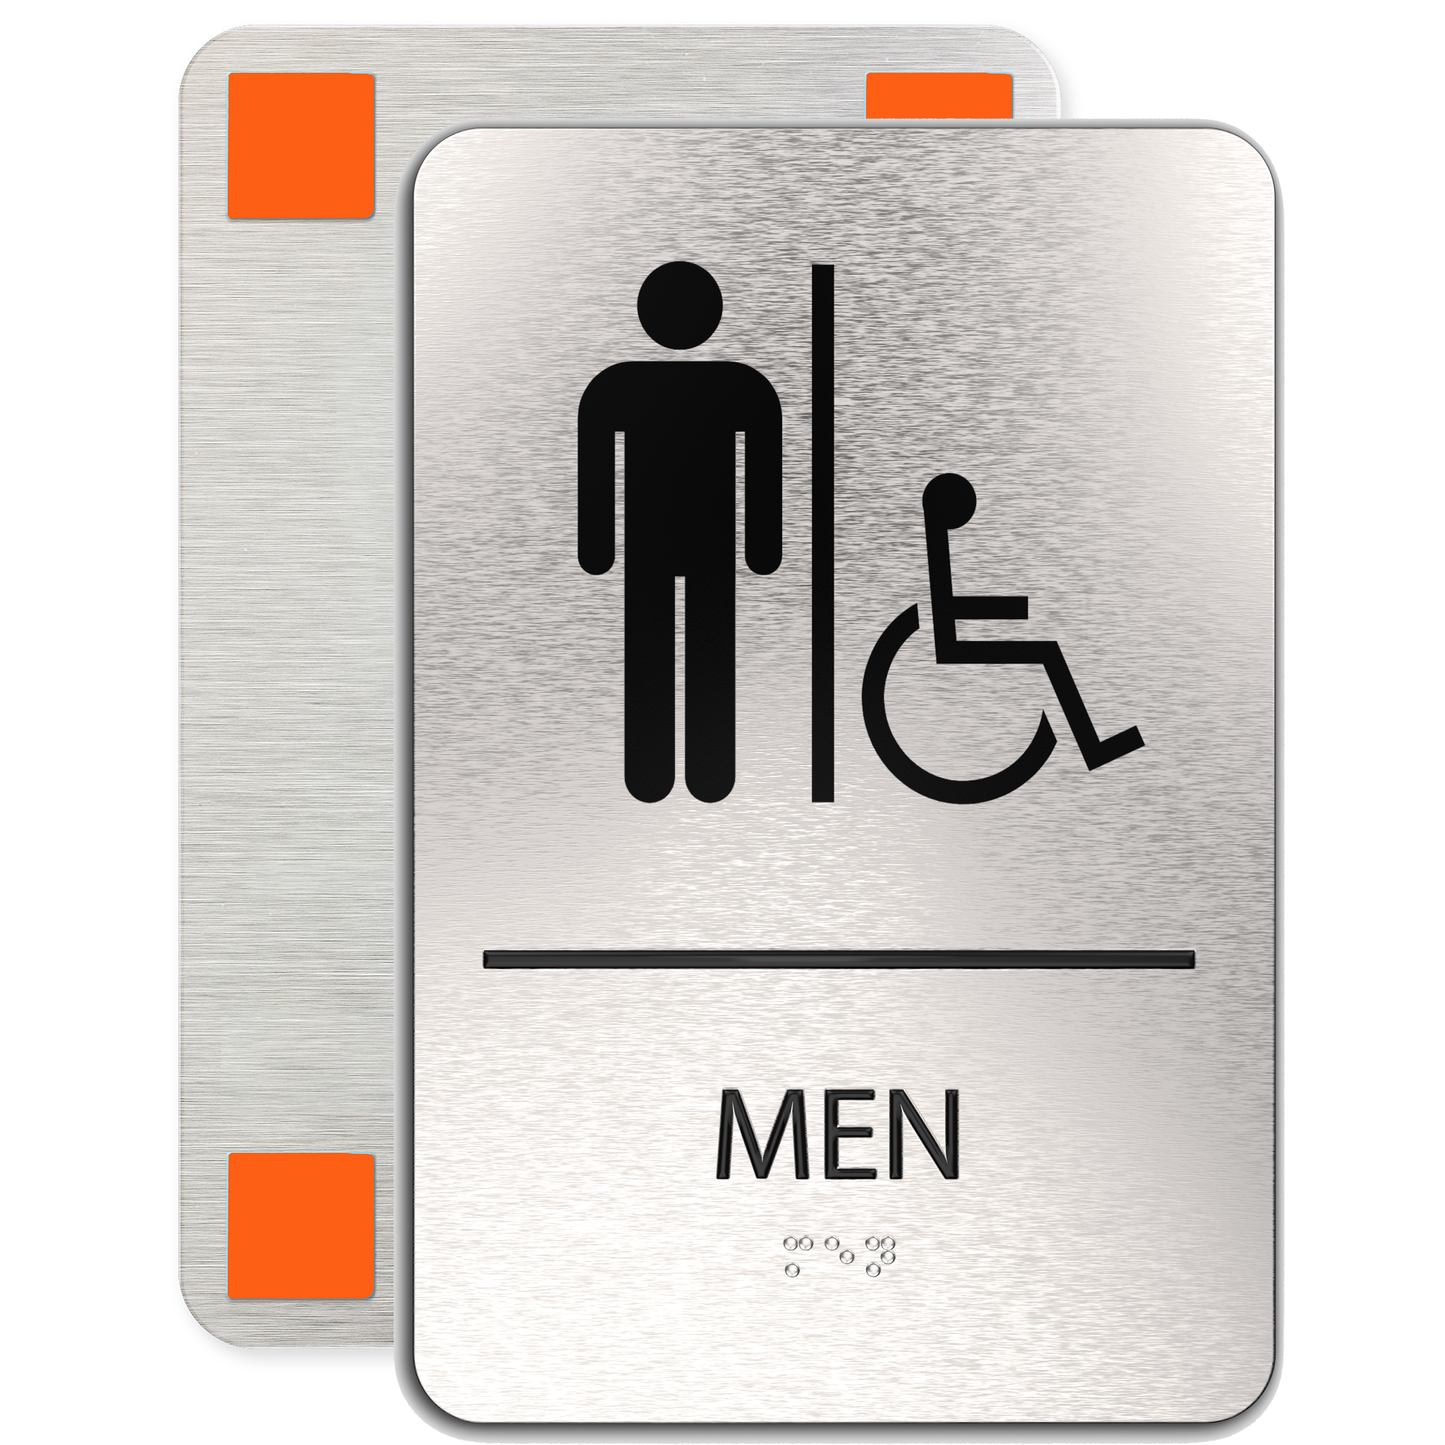 MEN Restroom Signs with Man & Wheelchair Symbols, ADA CompliantBrushed Silver, Black Raised Text, Grade II Braille, 6"x9"